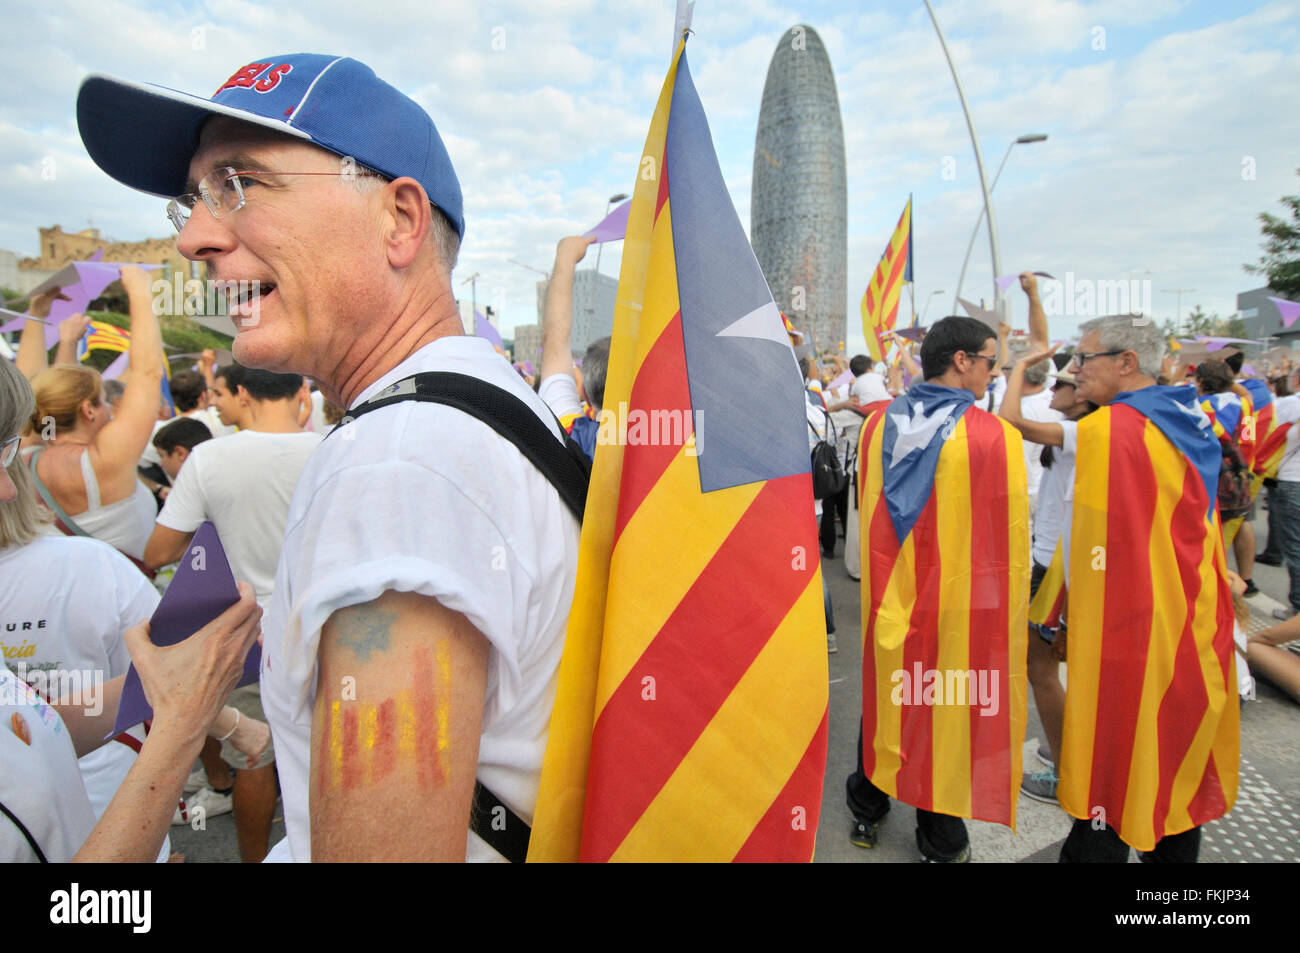 Political demonstration for the independence of Catalonia, September 11 2015, Barcelona, Catalonia, Spain. Stock Photo